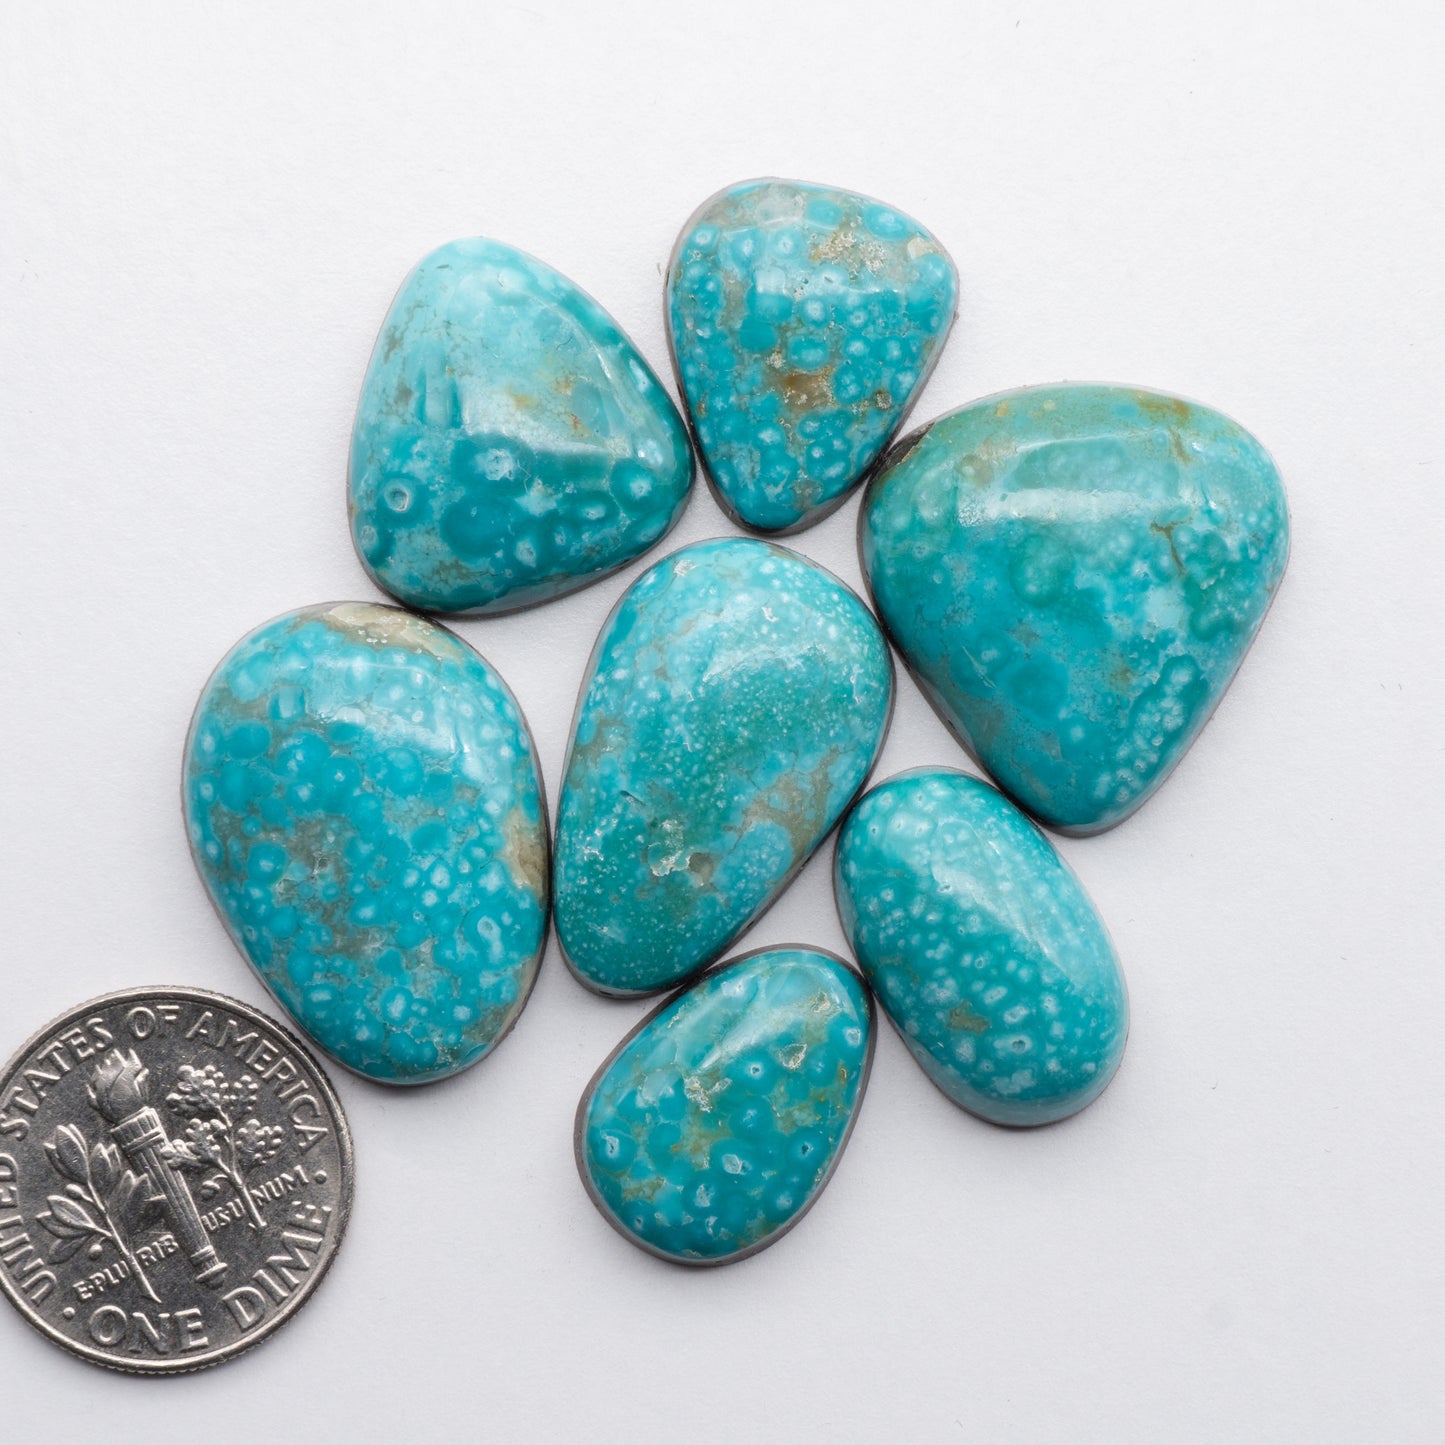 Cumpas Turquoise cabochons have a glossy finish and are backed for added strength. Cumpas Turquoise is mined in Sonora, Mexico.